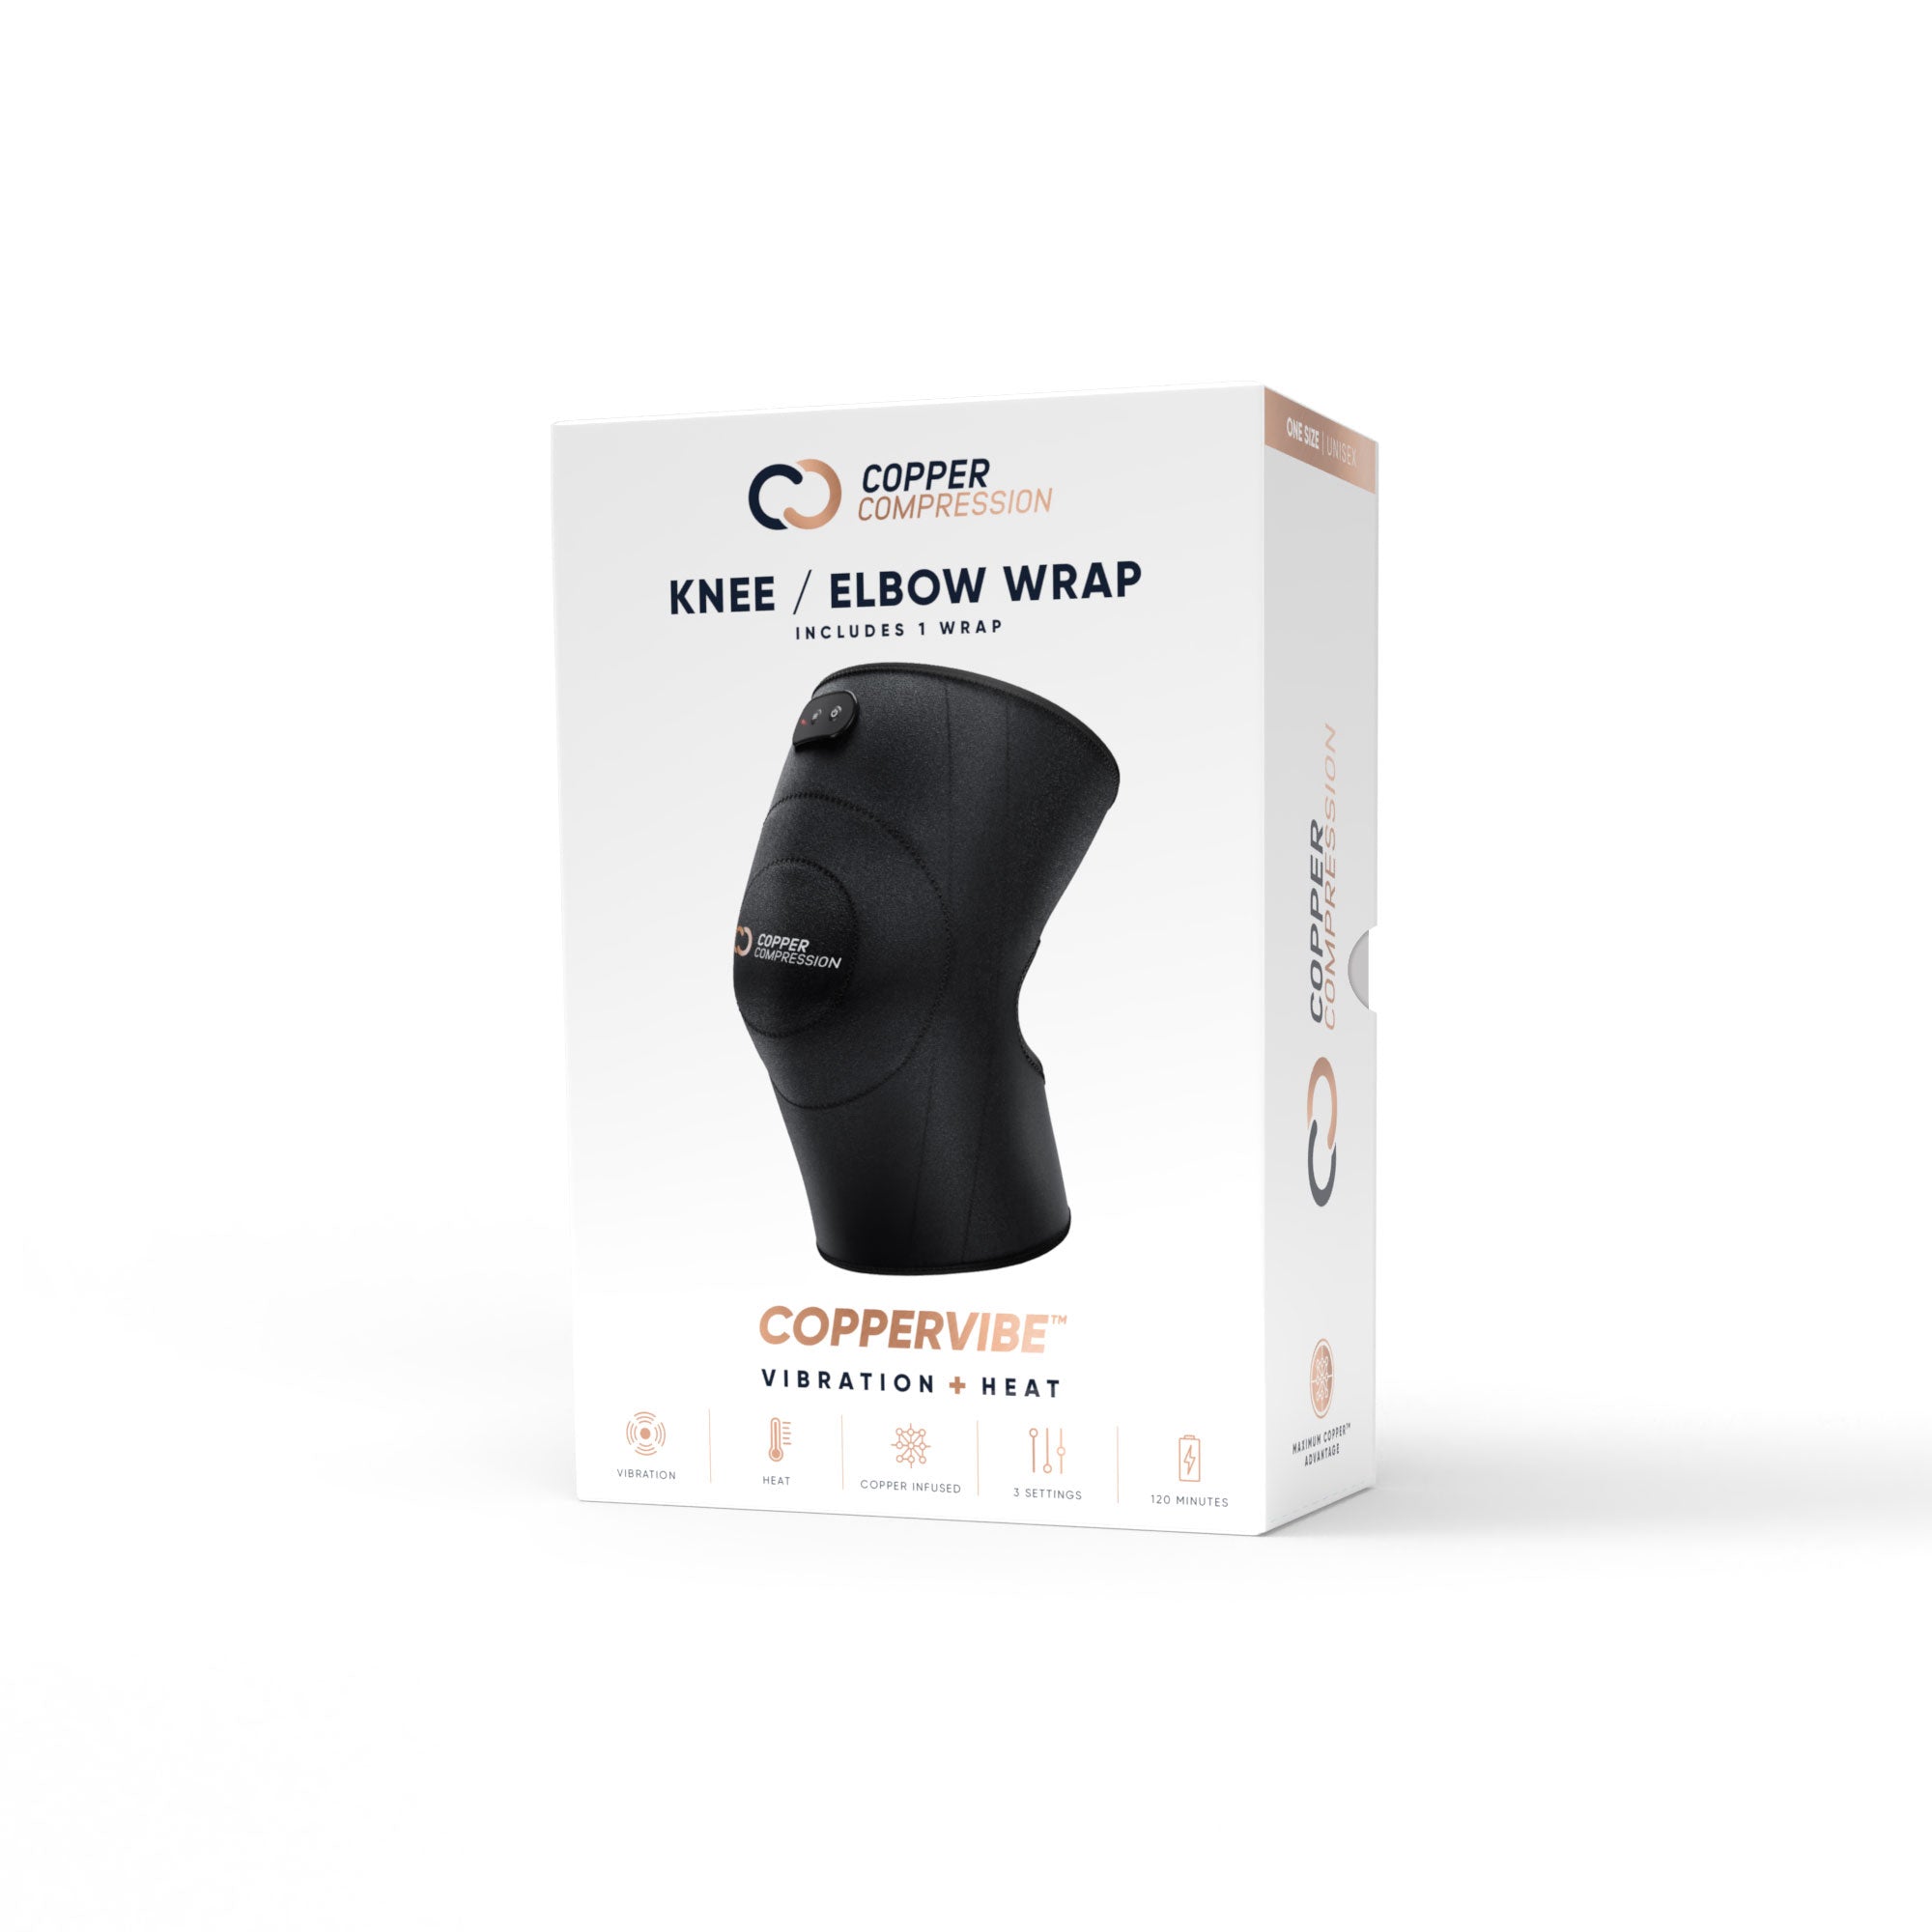 CopperVibe Vibration+Heat Therapy Knee/Elbow Wrap